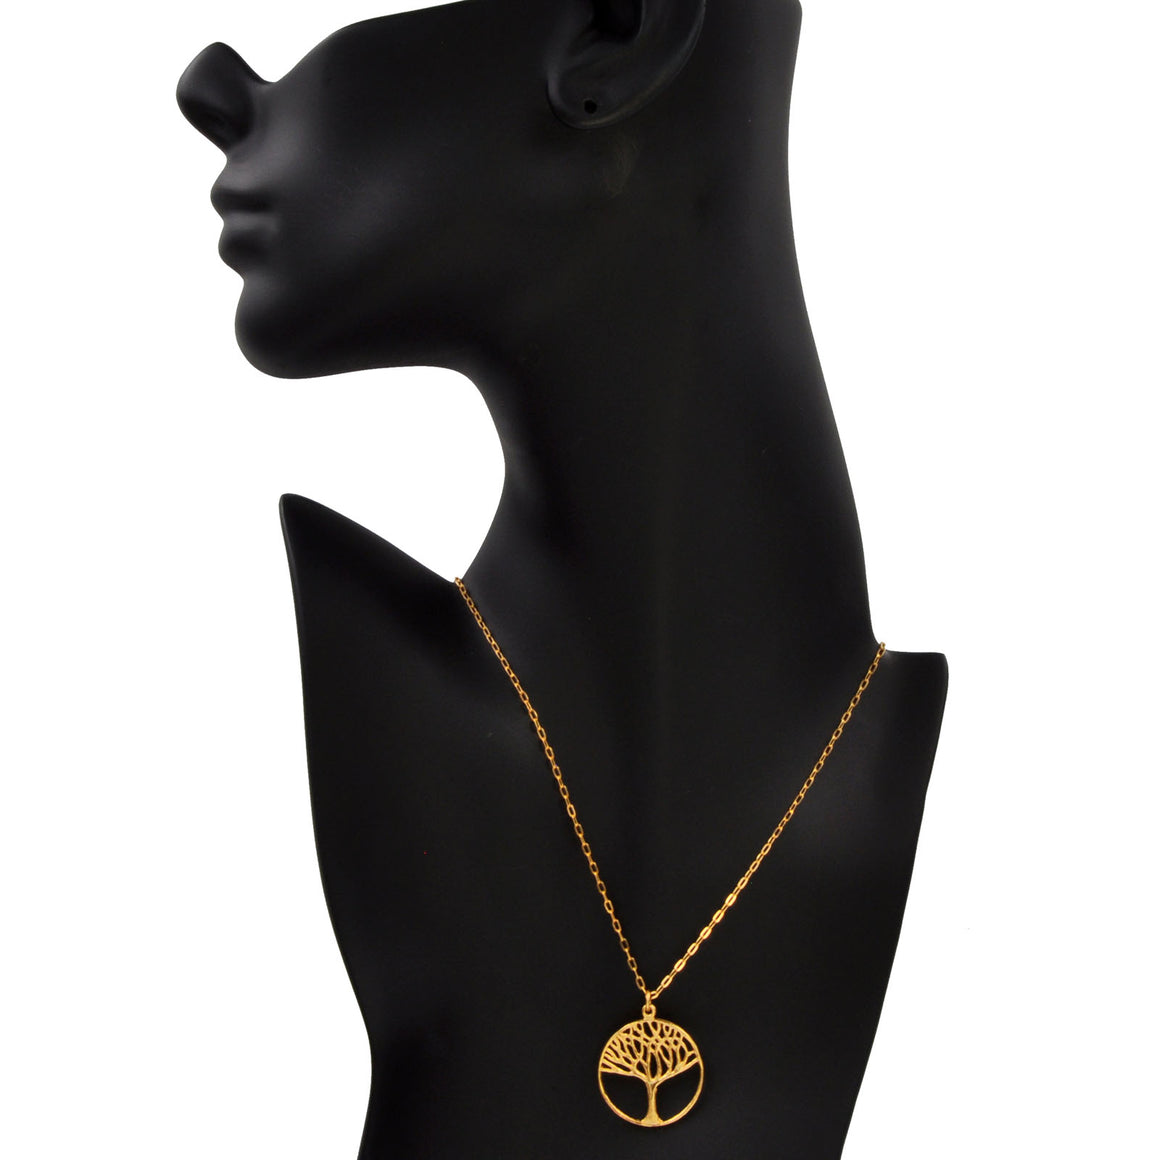 Tree of Life Necklace (Medium) - 24K Gold Plated